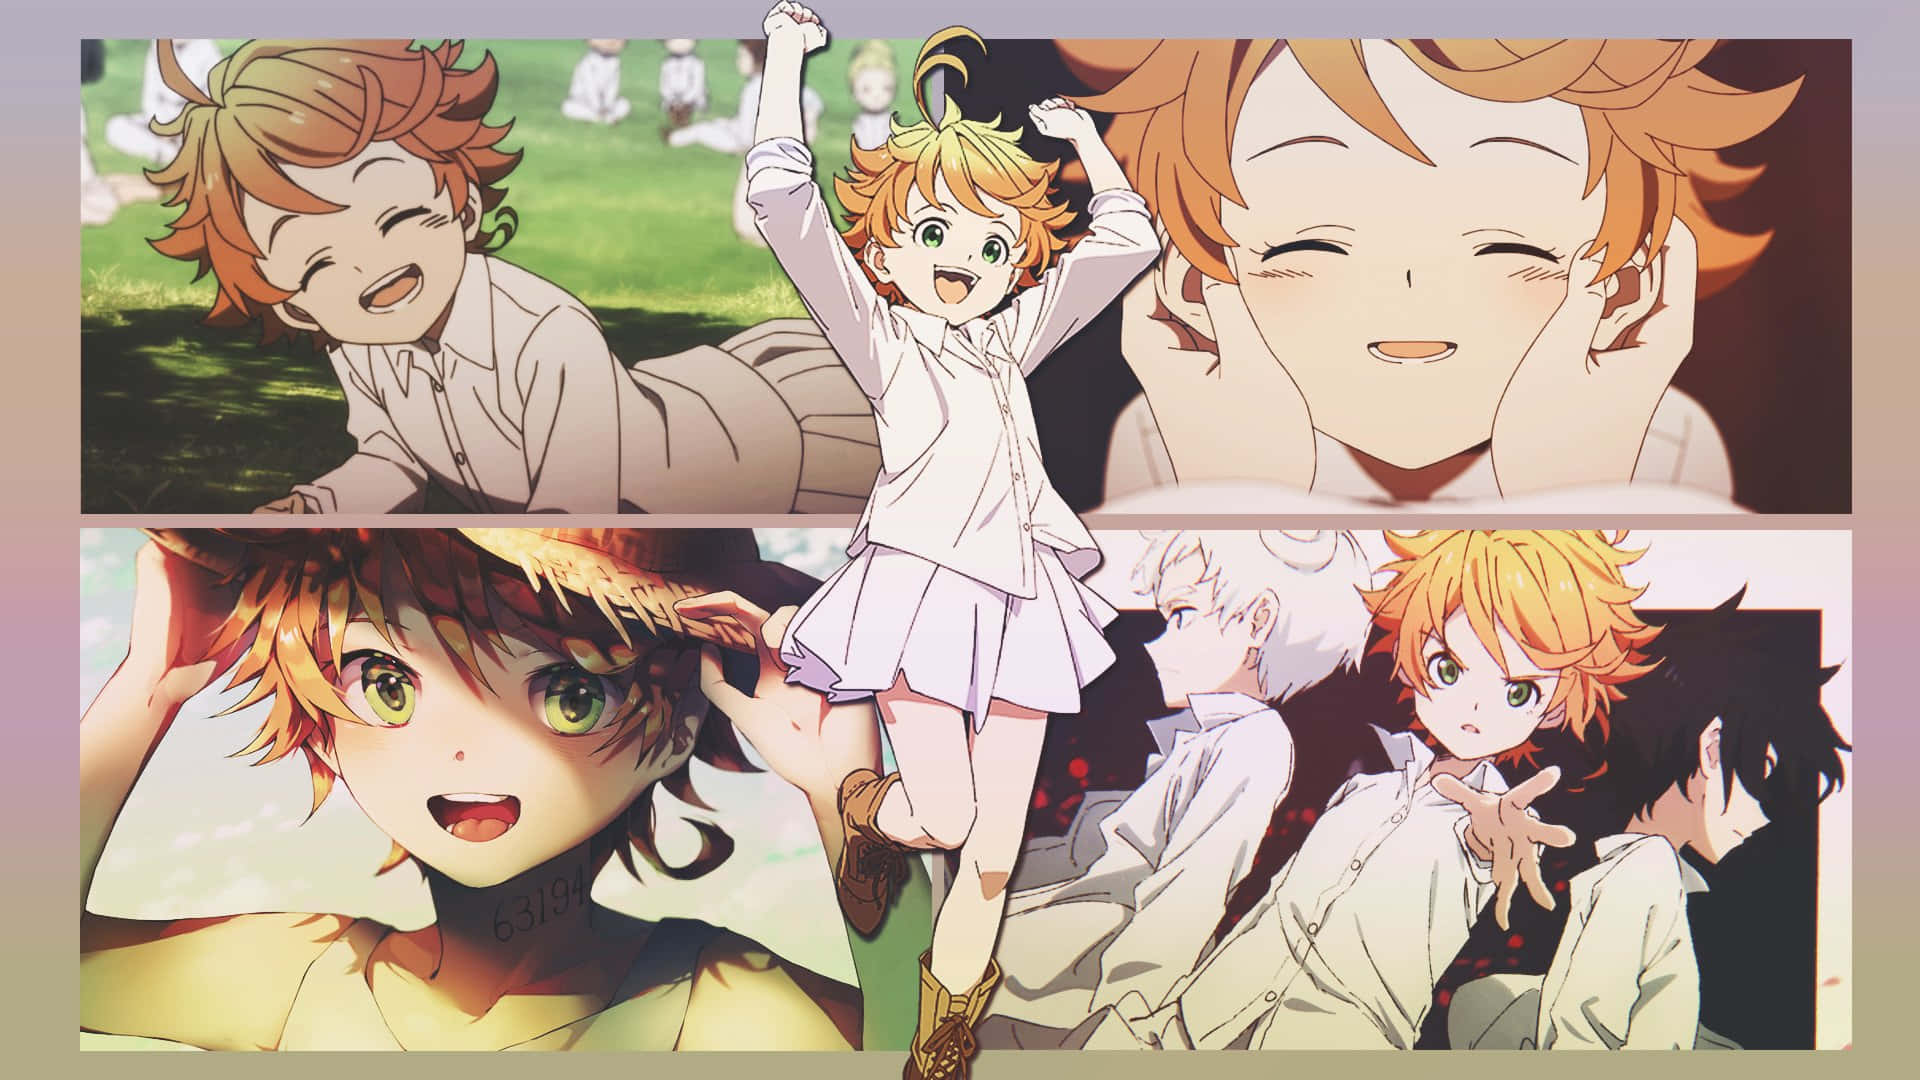 Emma from The Promised Neverland, ready for action. Wallpaper